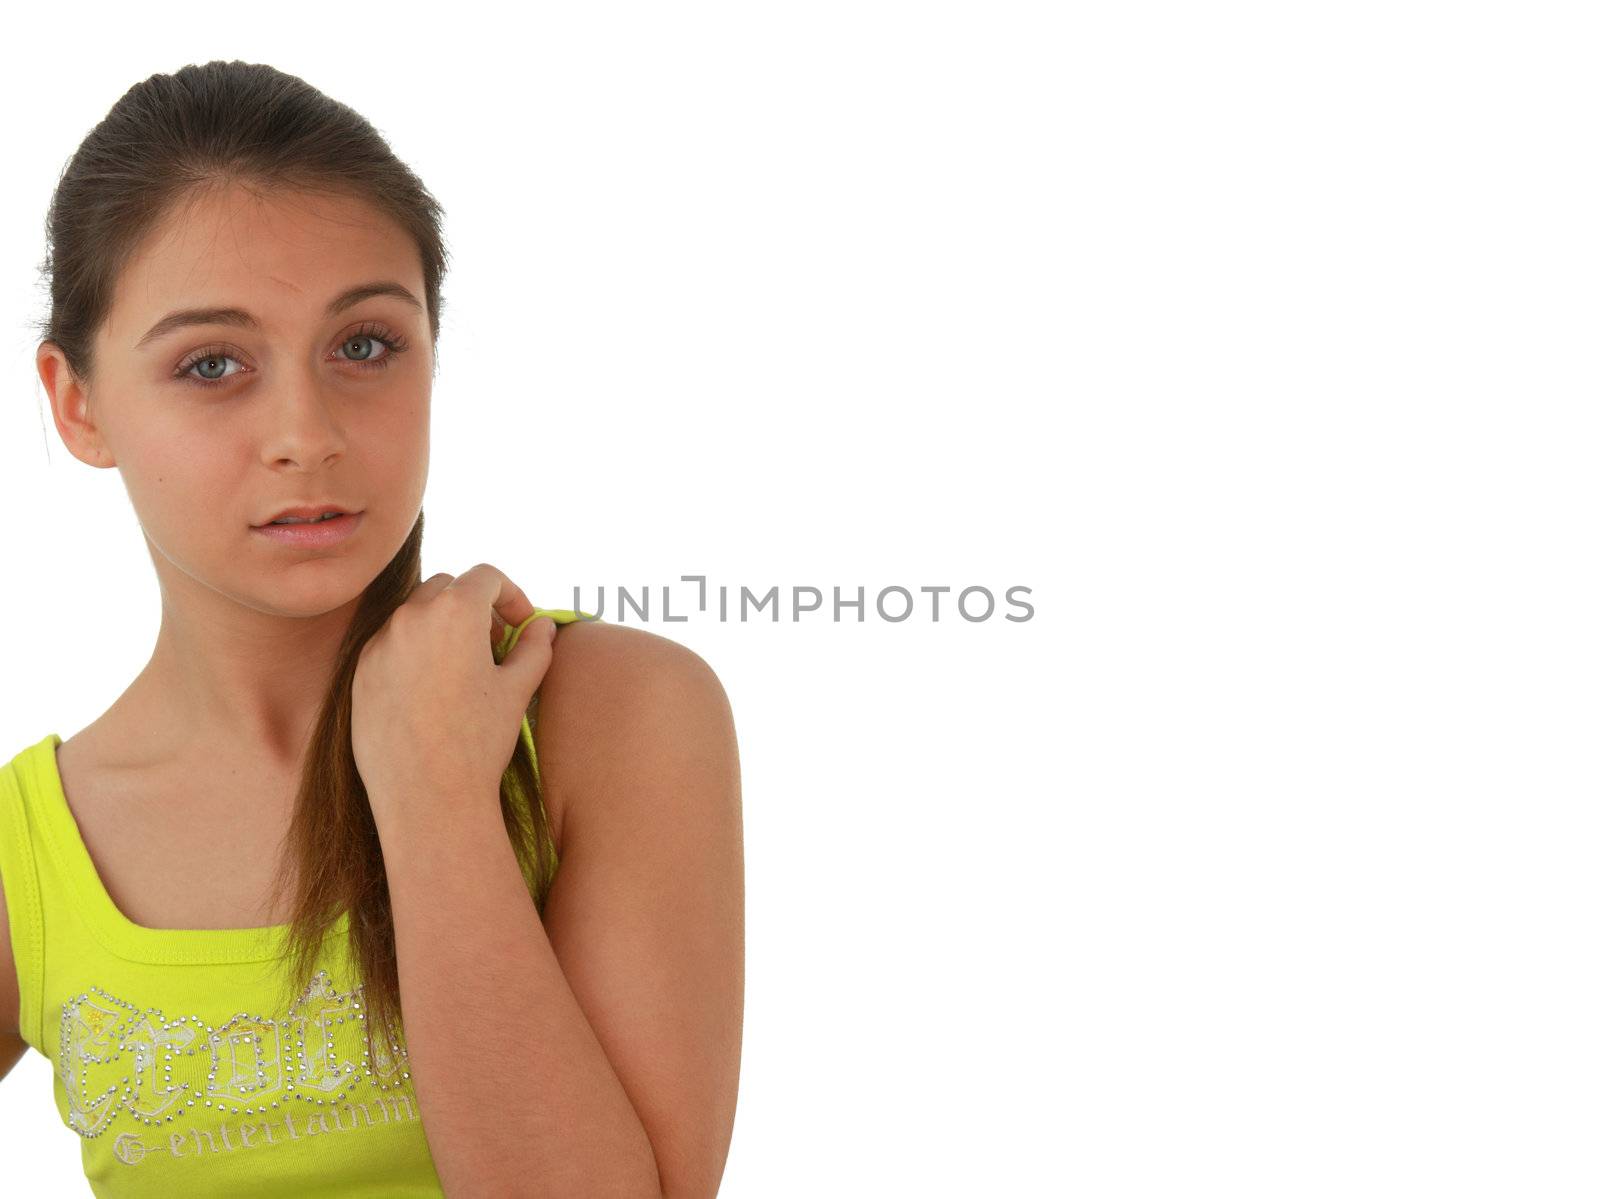 Young girl in green shirt portrait isolated on white background